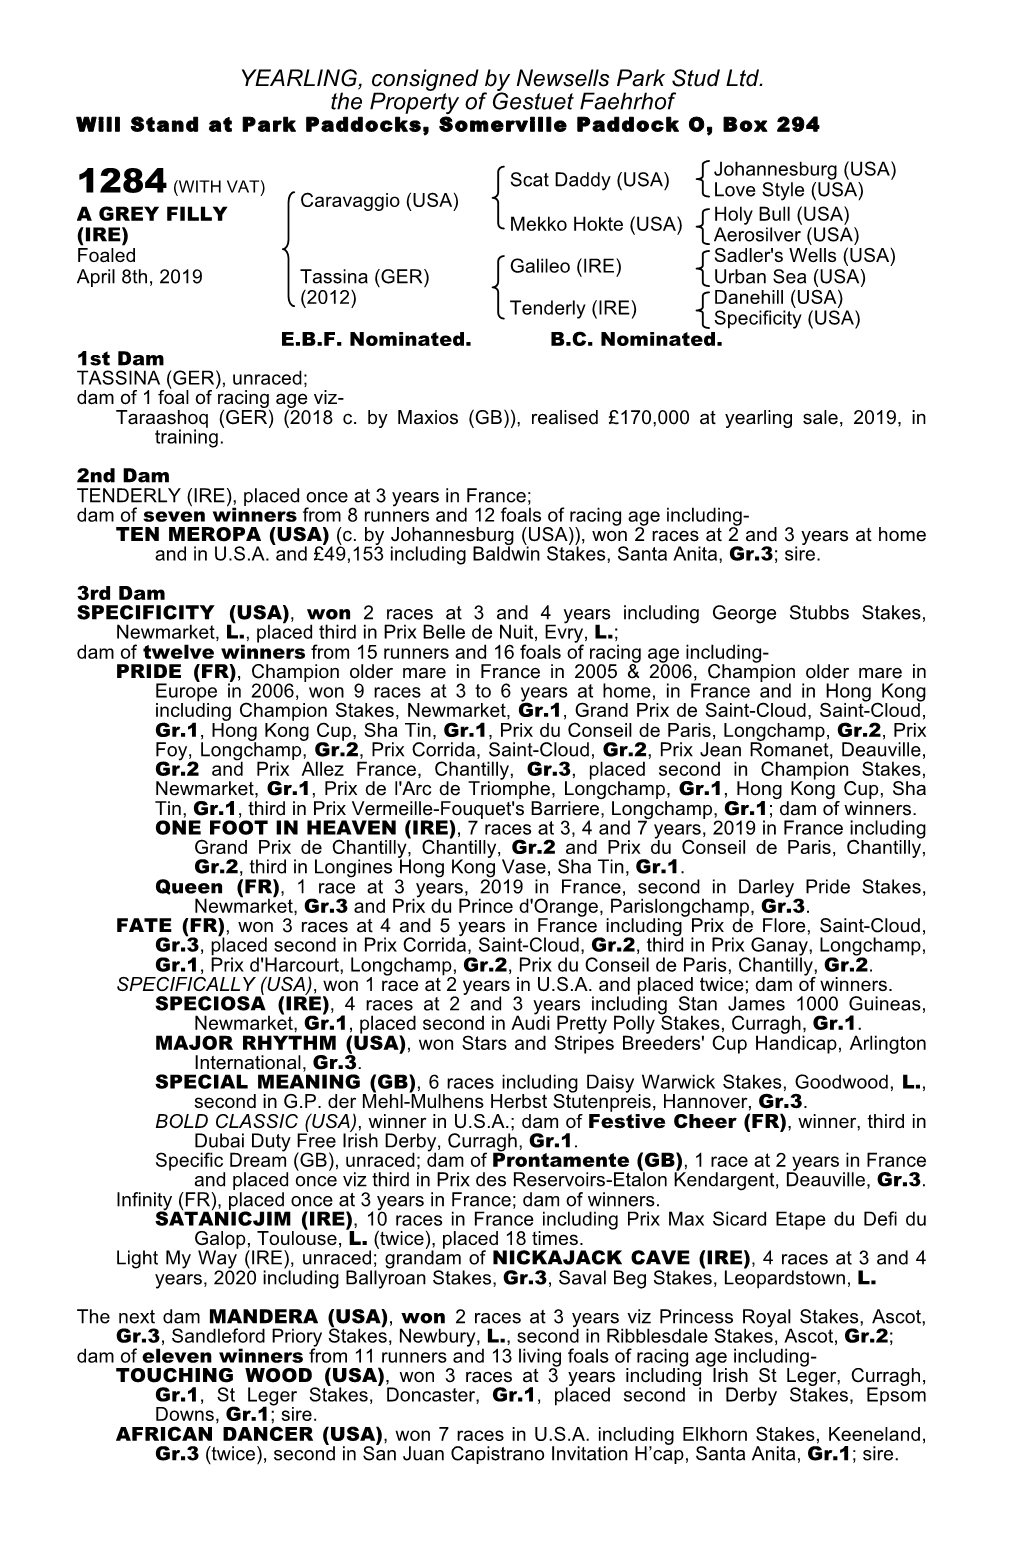 YEARLING, Consigned by Newsells Park Stud Ltd. the Property of Gestuet Faehrhof Will Stand at Park Paddocks, Somerville Paddock O, Box 294